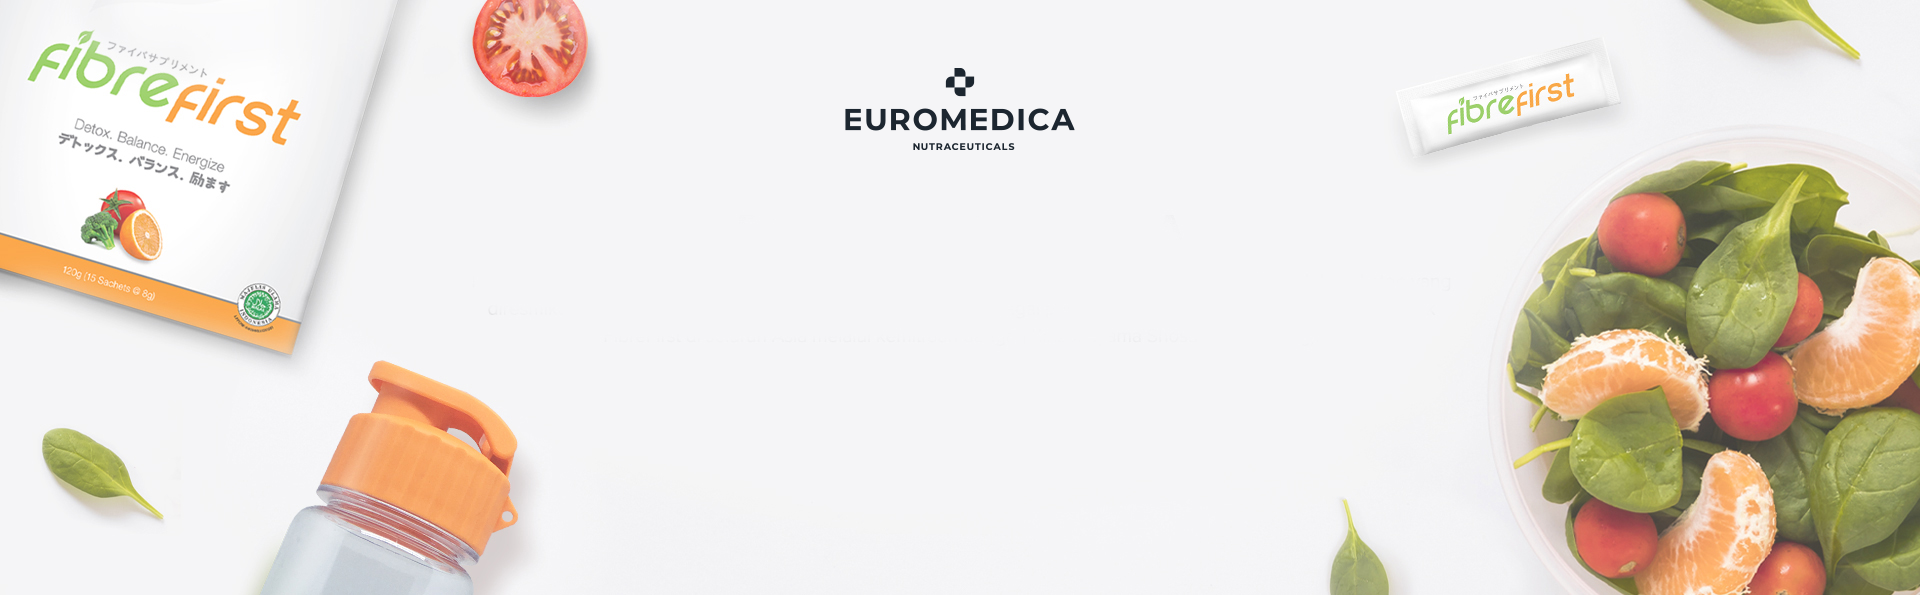 About Us FibreFirst a product of Euromedica Nutraceuticals